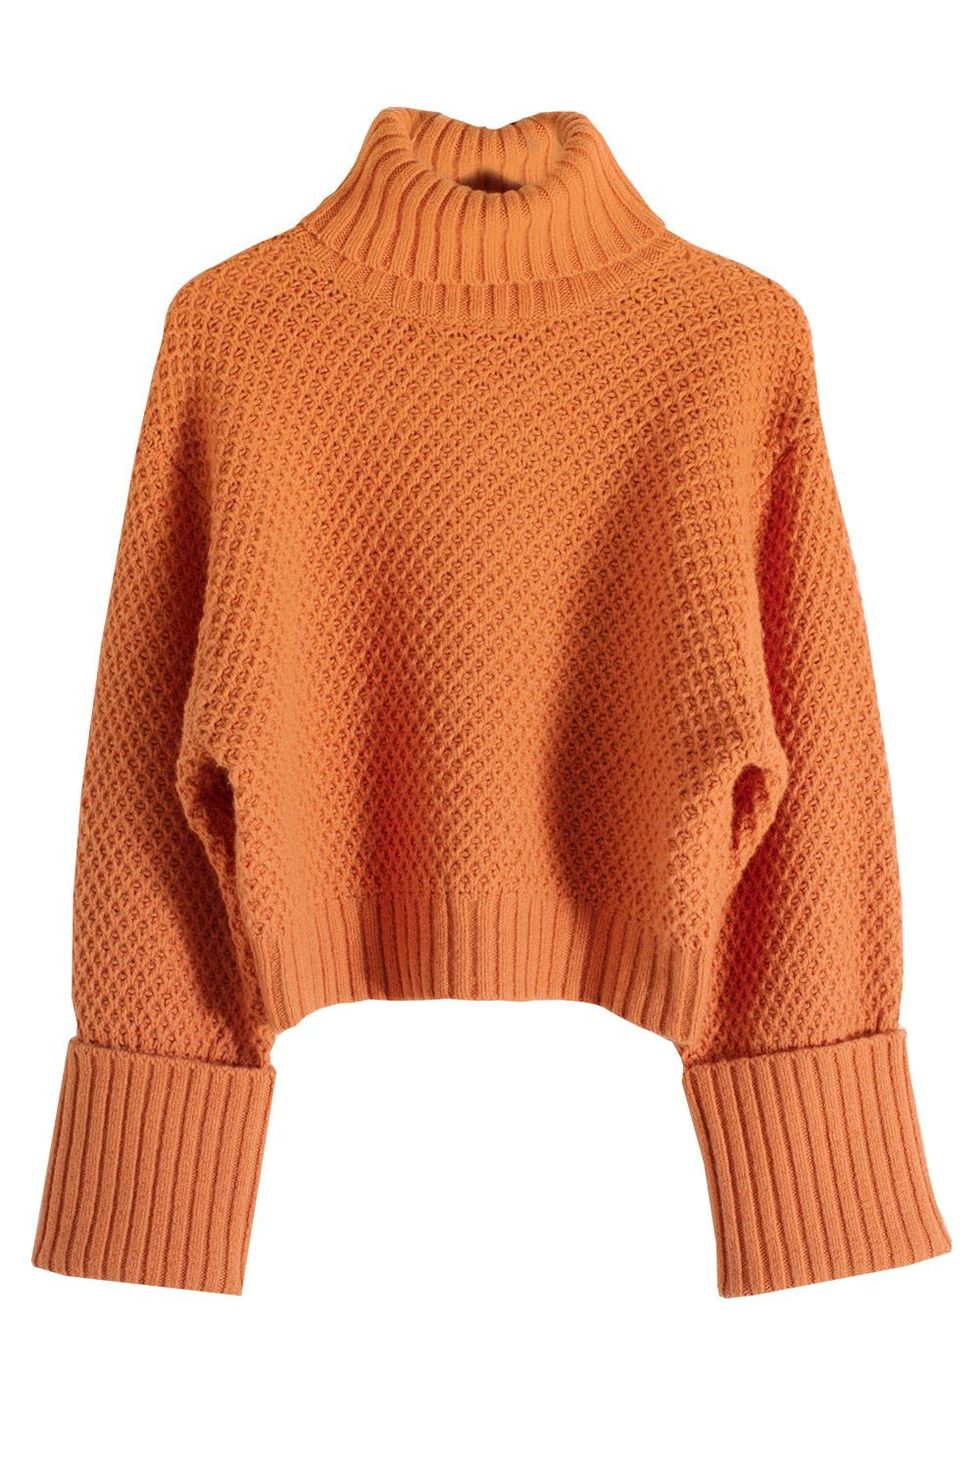 Shop it: The Chunky Knit